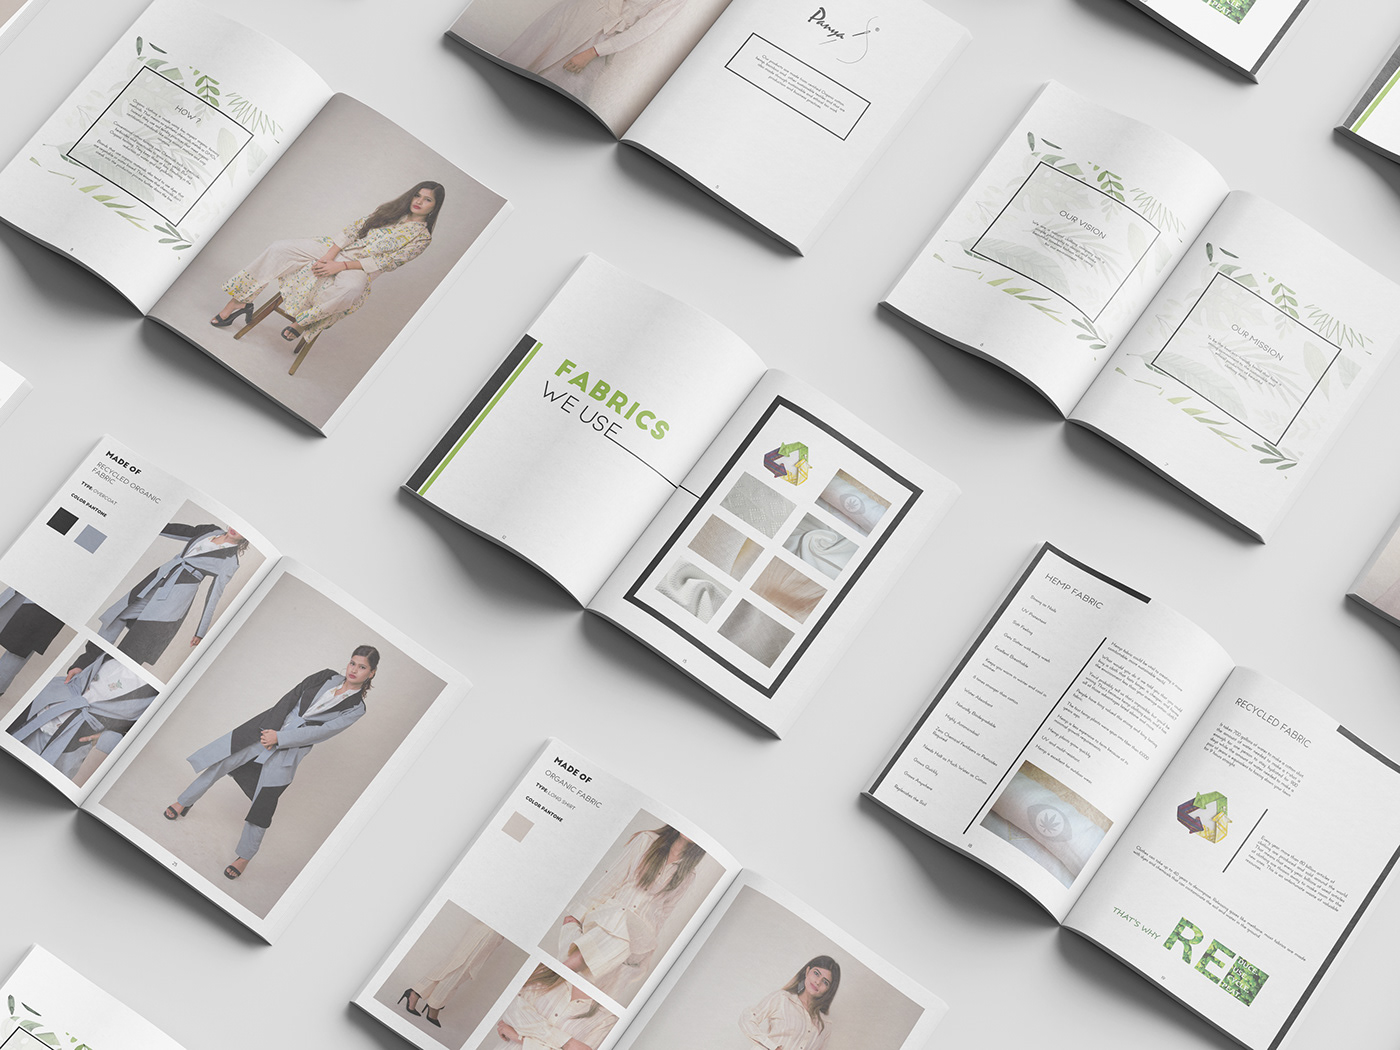 cataloguedesign communicationdesign graphicdesign ILLUSTRATION  magazinedesign mockers posters SocialMediaPosts Startup VisualDesign